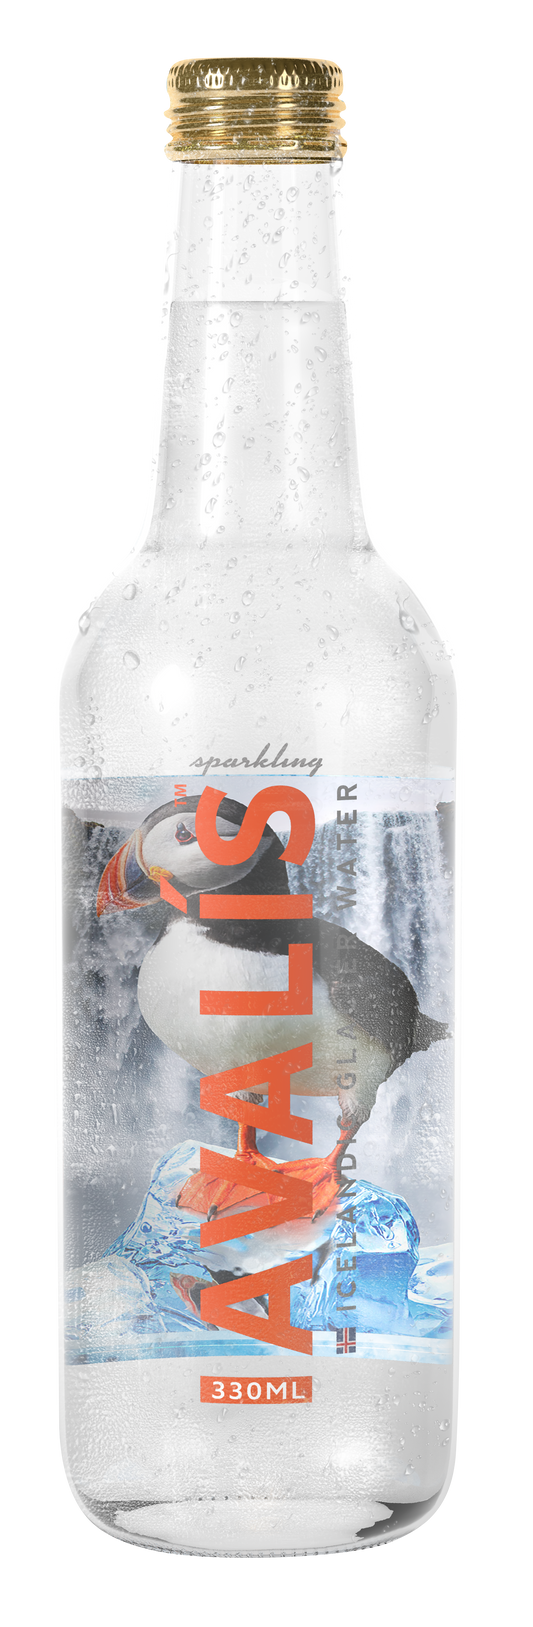 Avalis Icelandic Glacier water - A case of 24 Sparkling x 330ml Glass Bottles